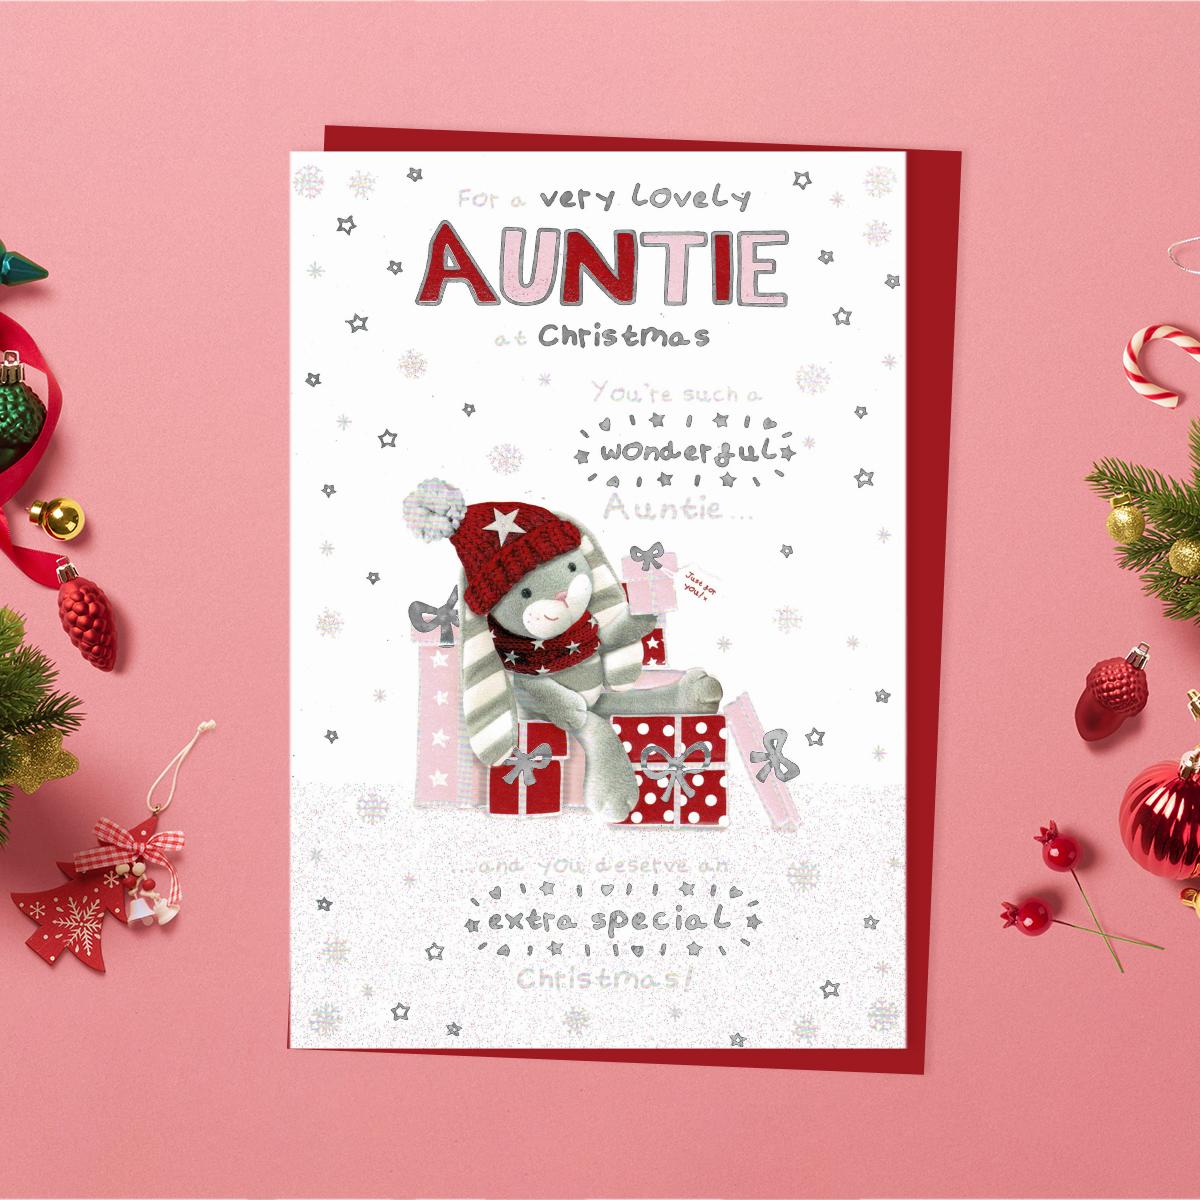 Auntie Christmas Card Alongside Its Red Envelope